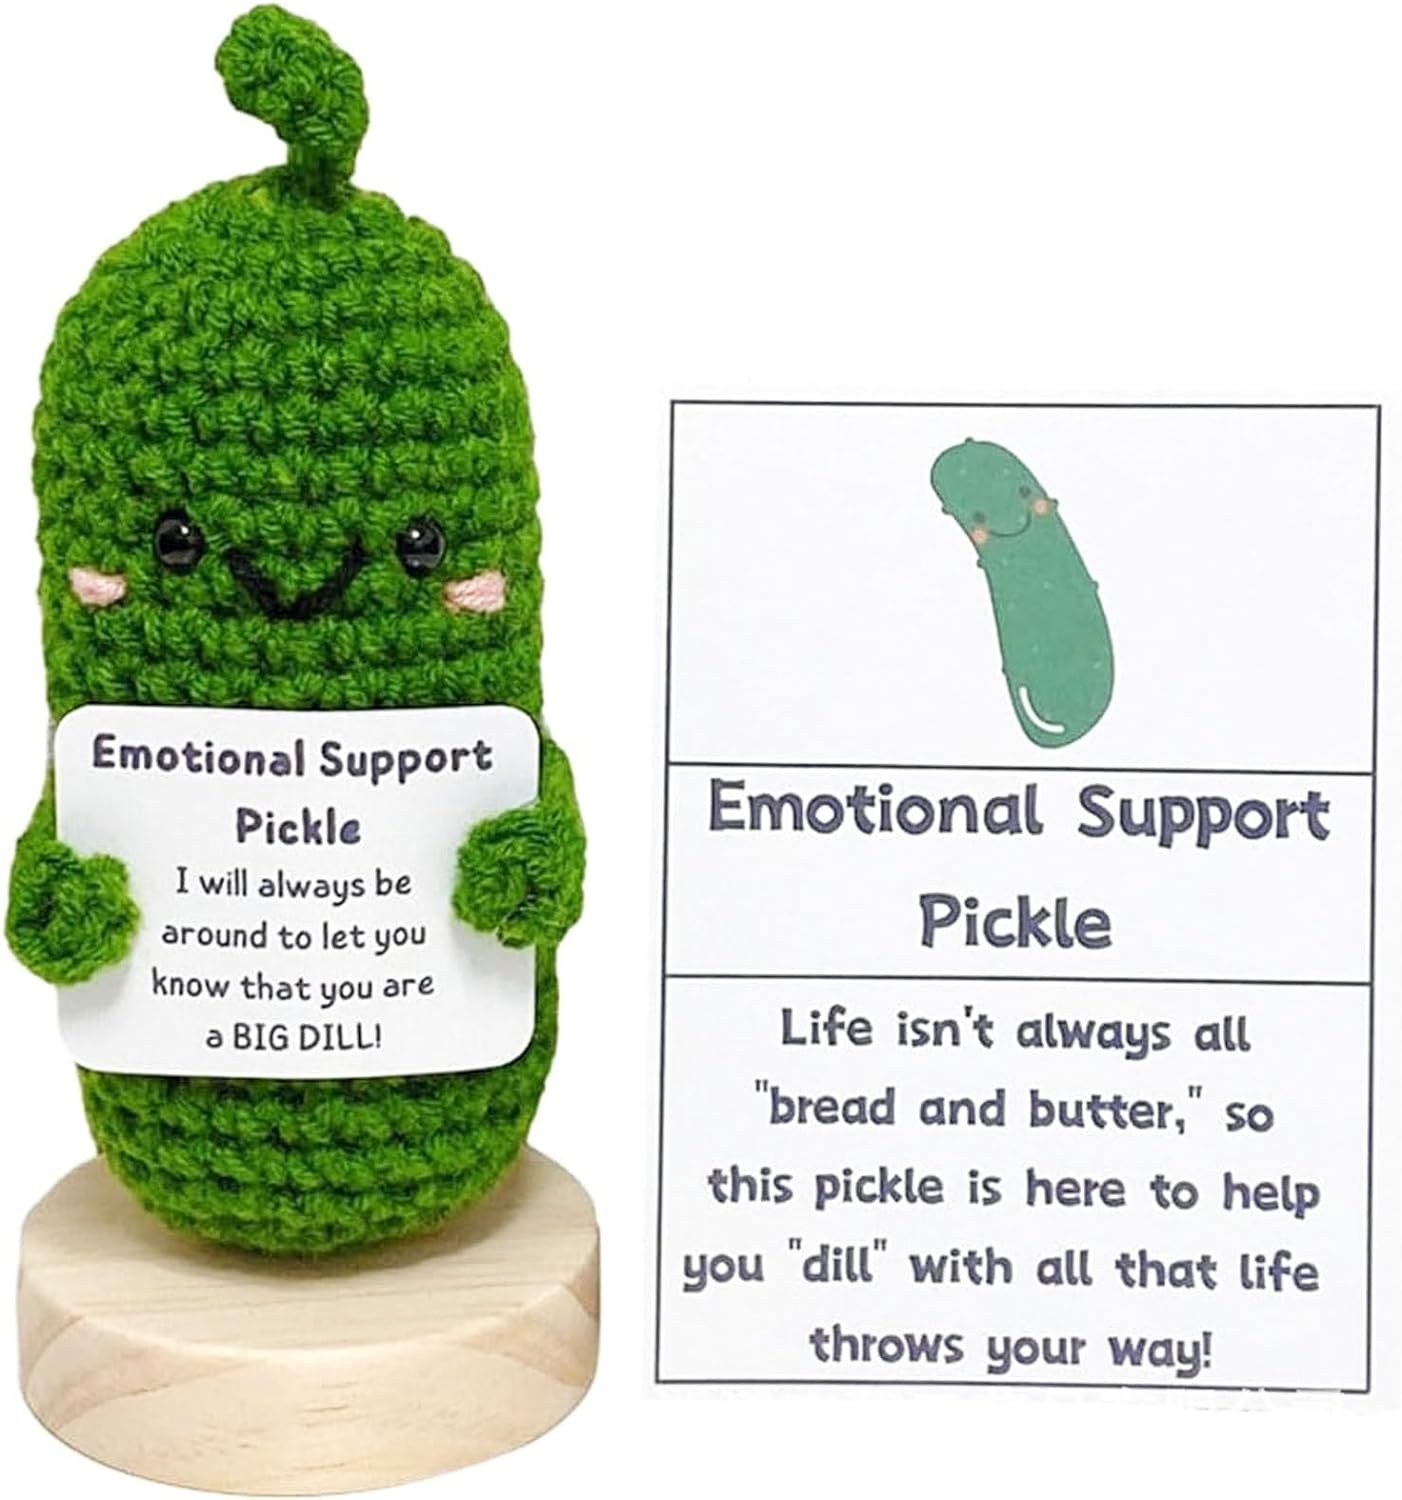 Emotional Support Pickle Handmade Emotional Support Pickled Cucumber Cute Crochet